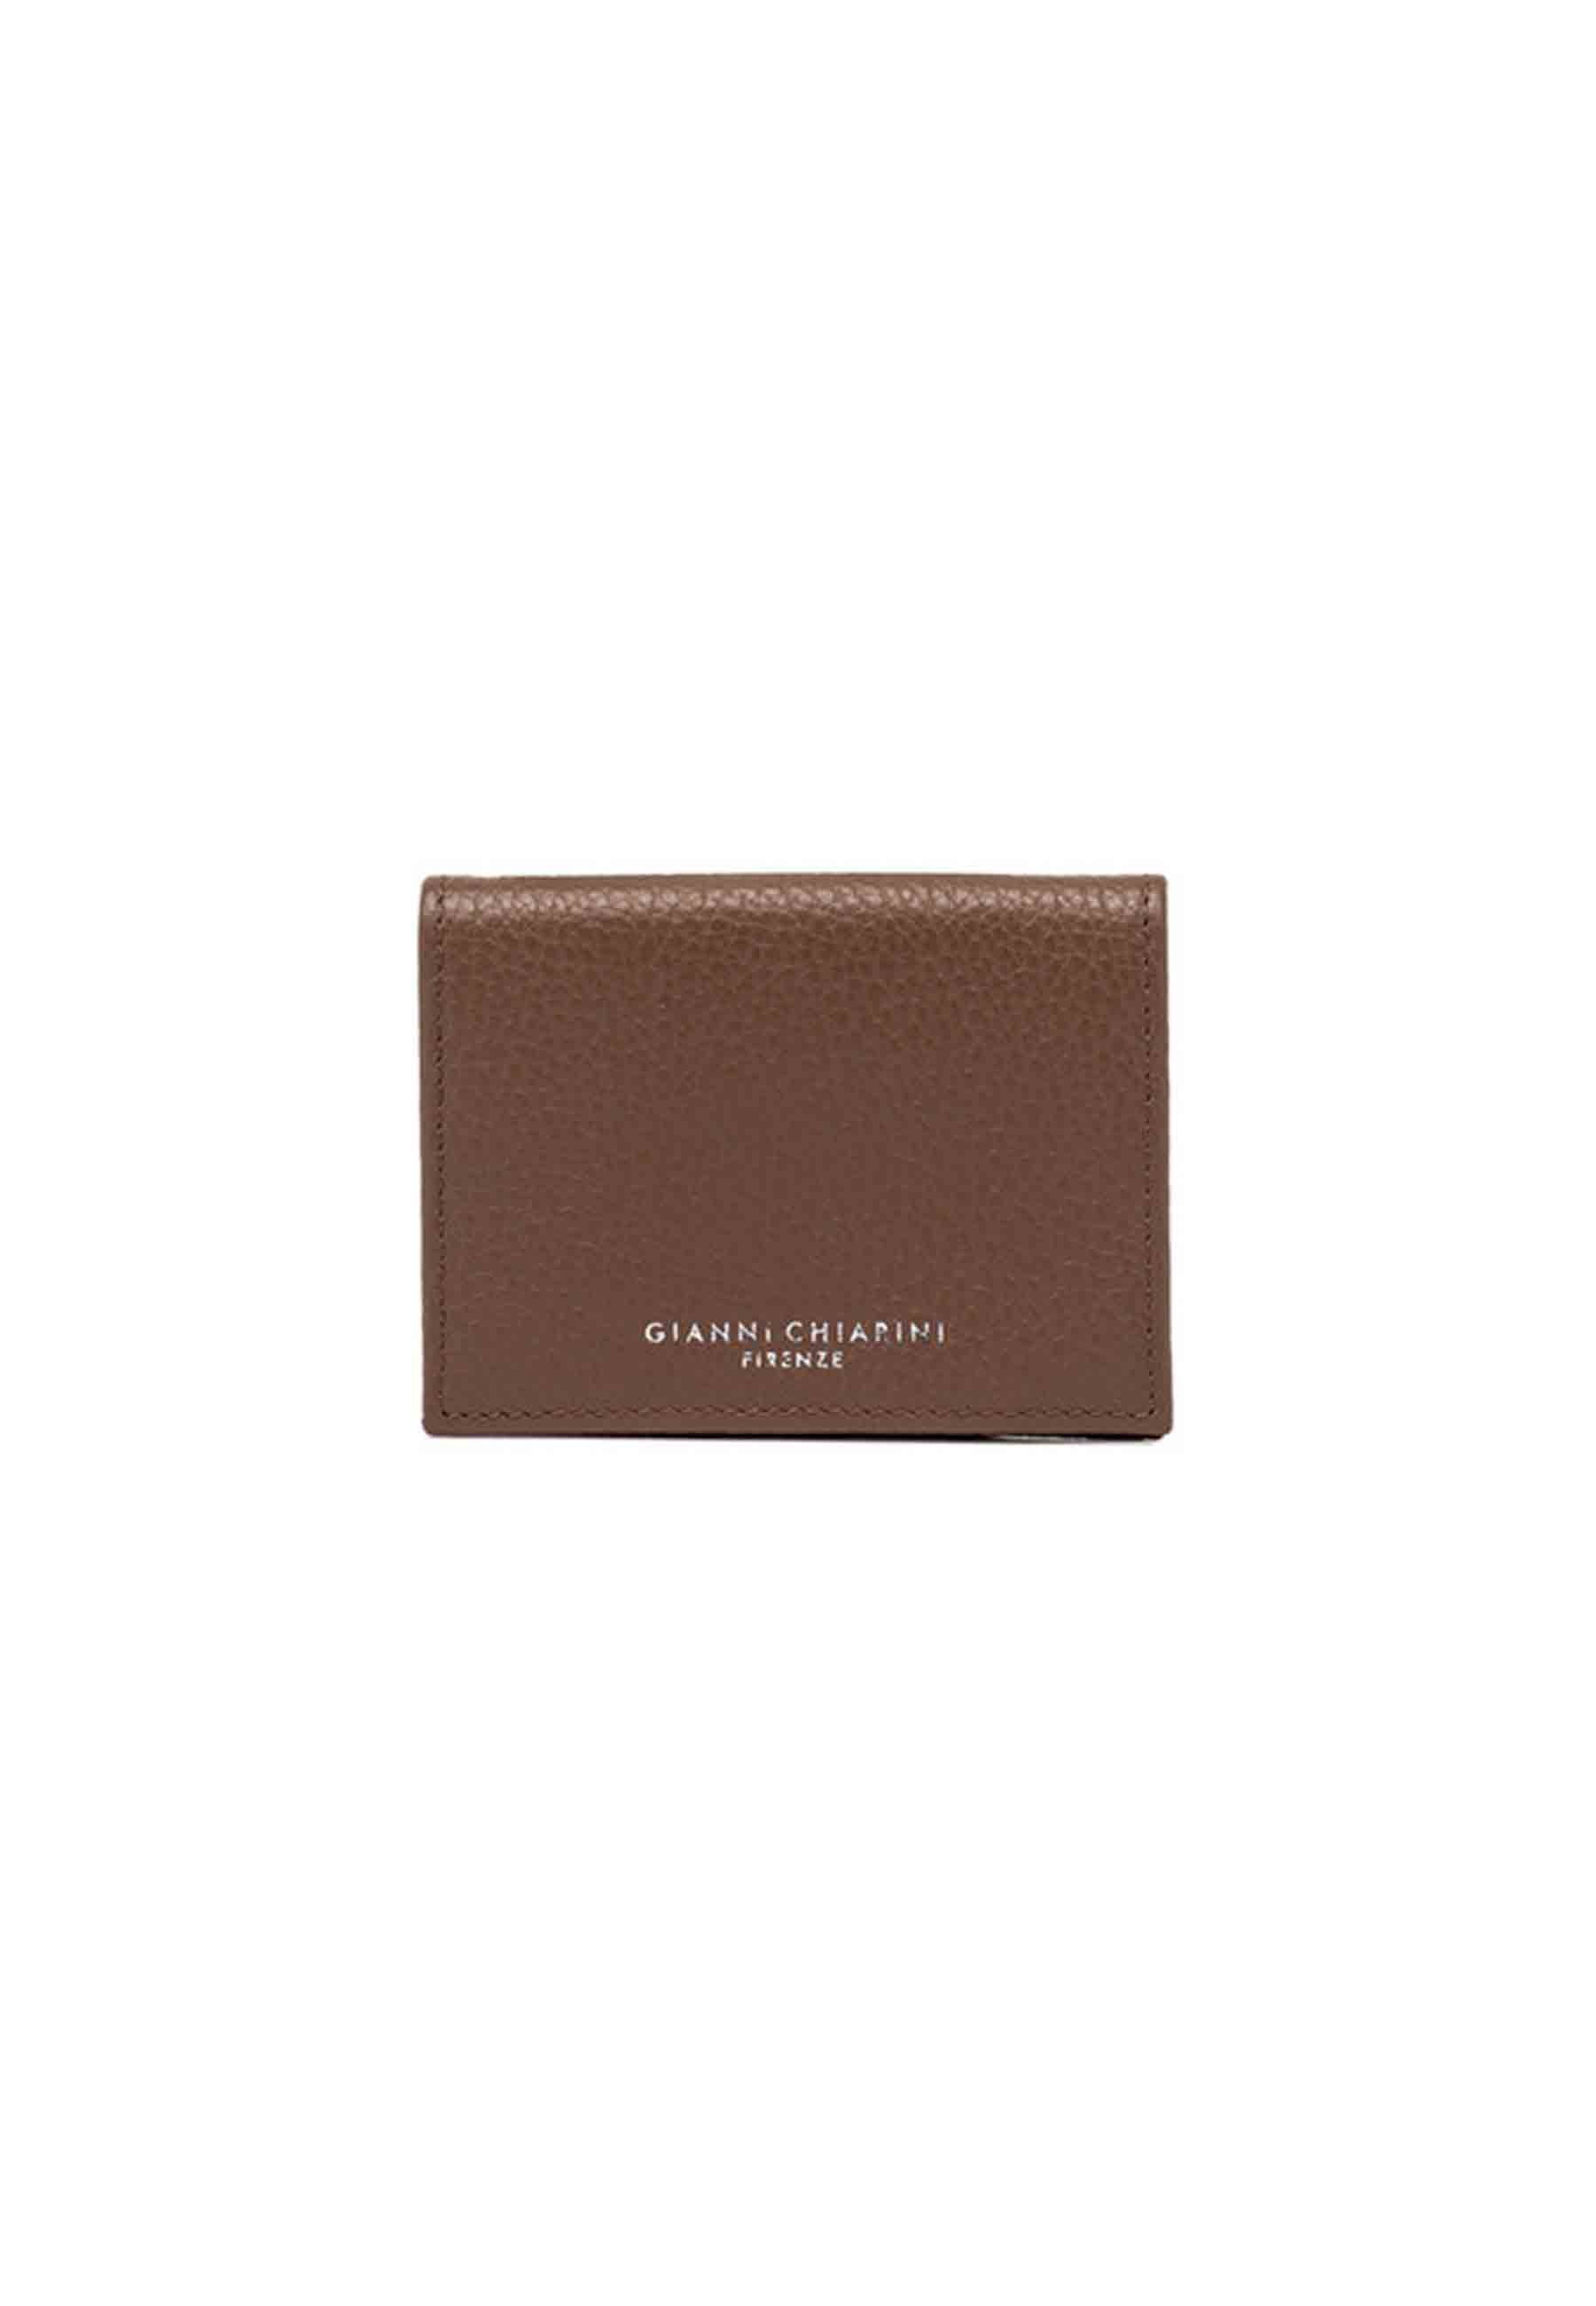 Women's card holder in beaver grained leather with button closure